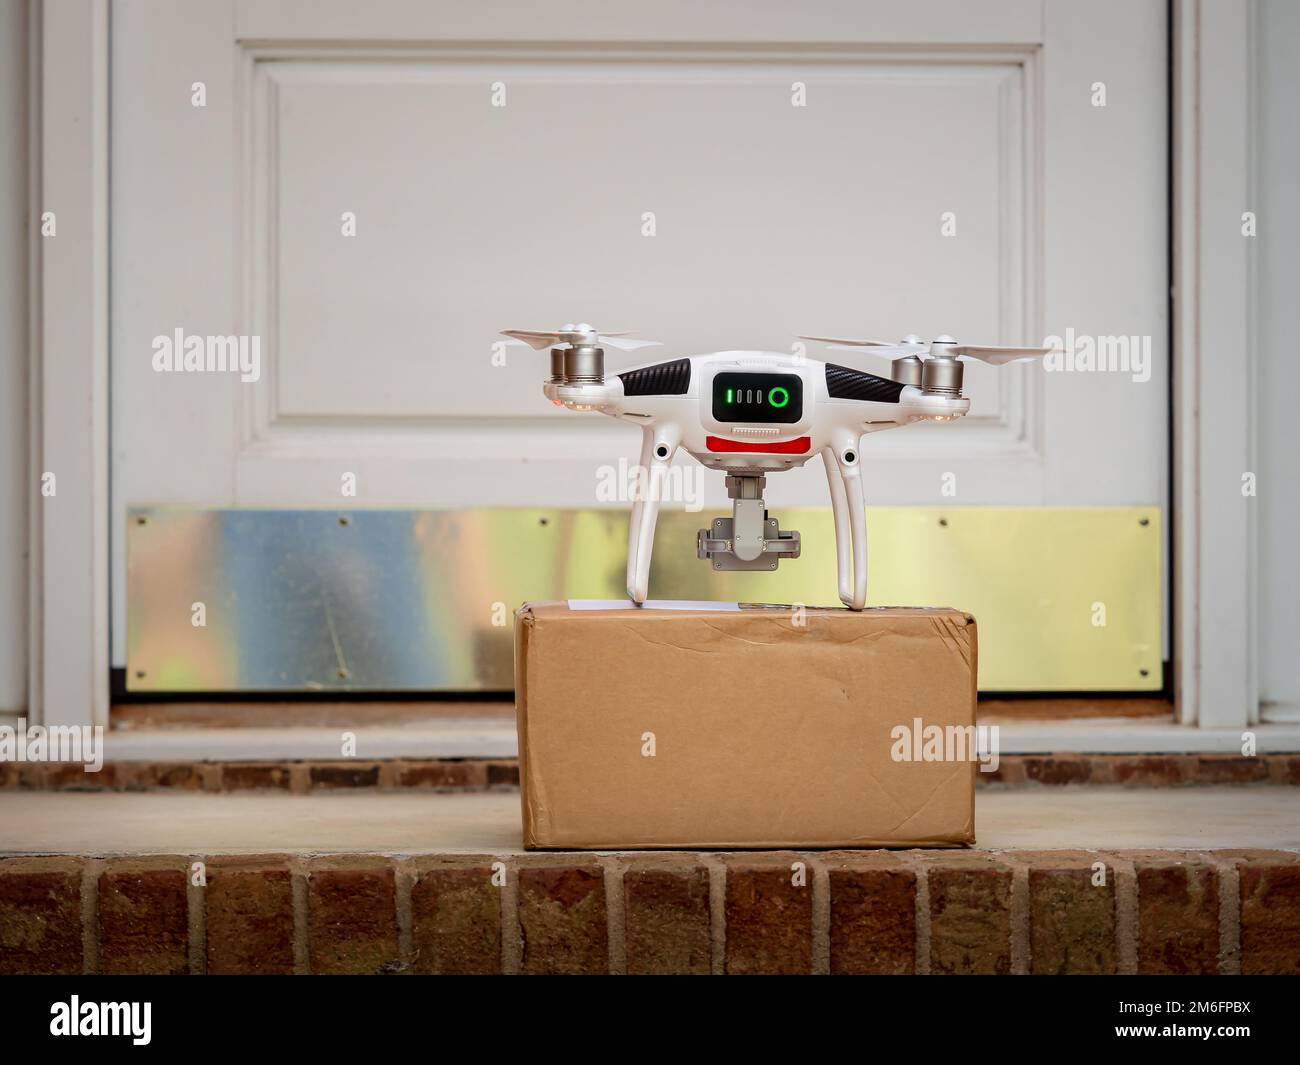 Drone delivering package to the front door of a house. Residential package delivery via unmanned aerial vehicle. Stock Photo